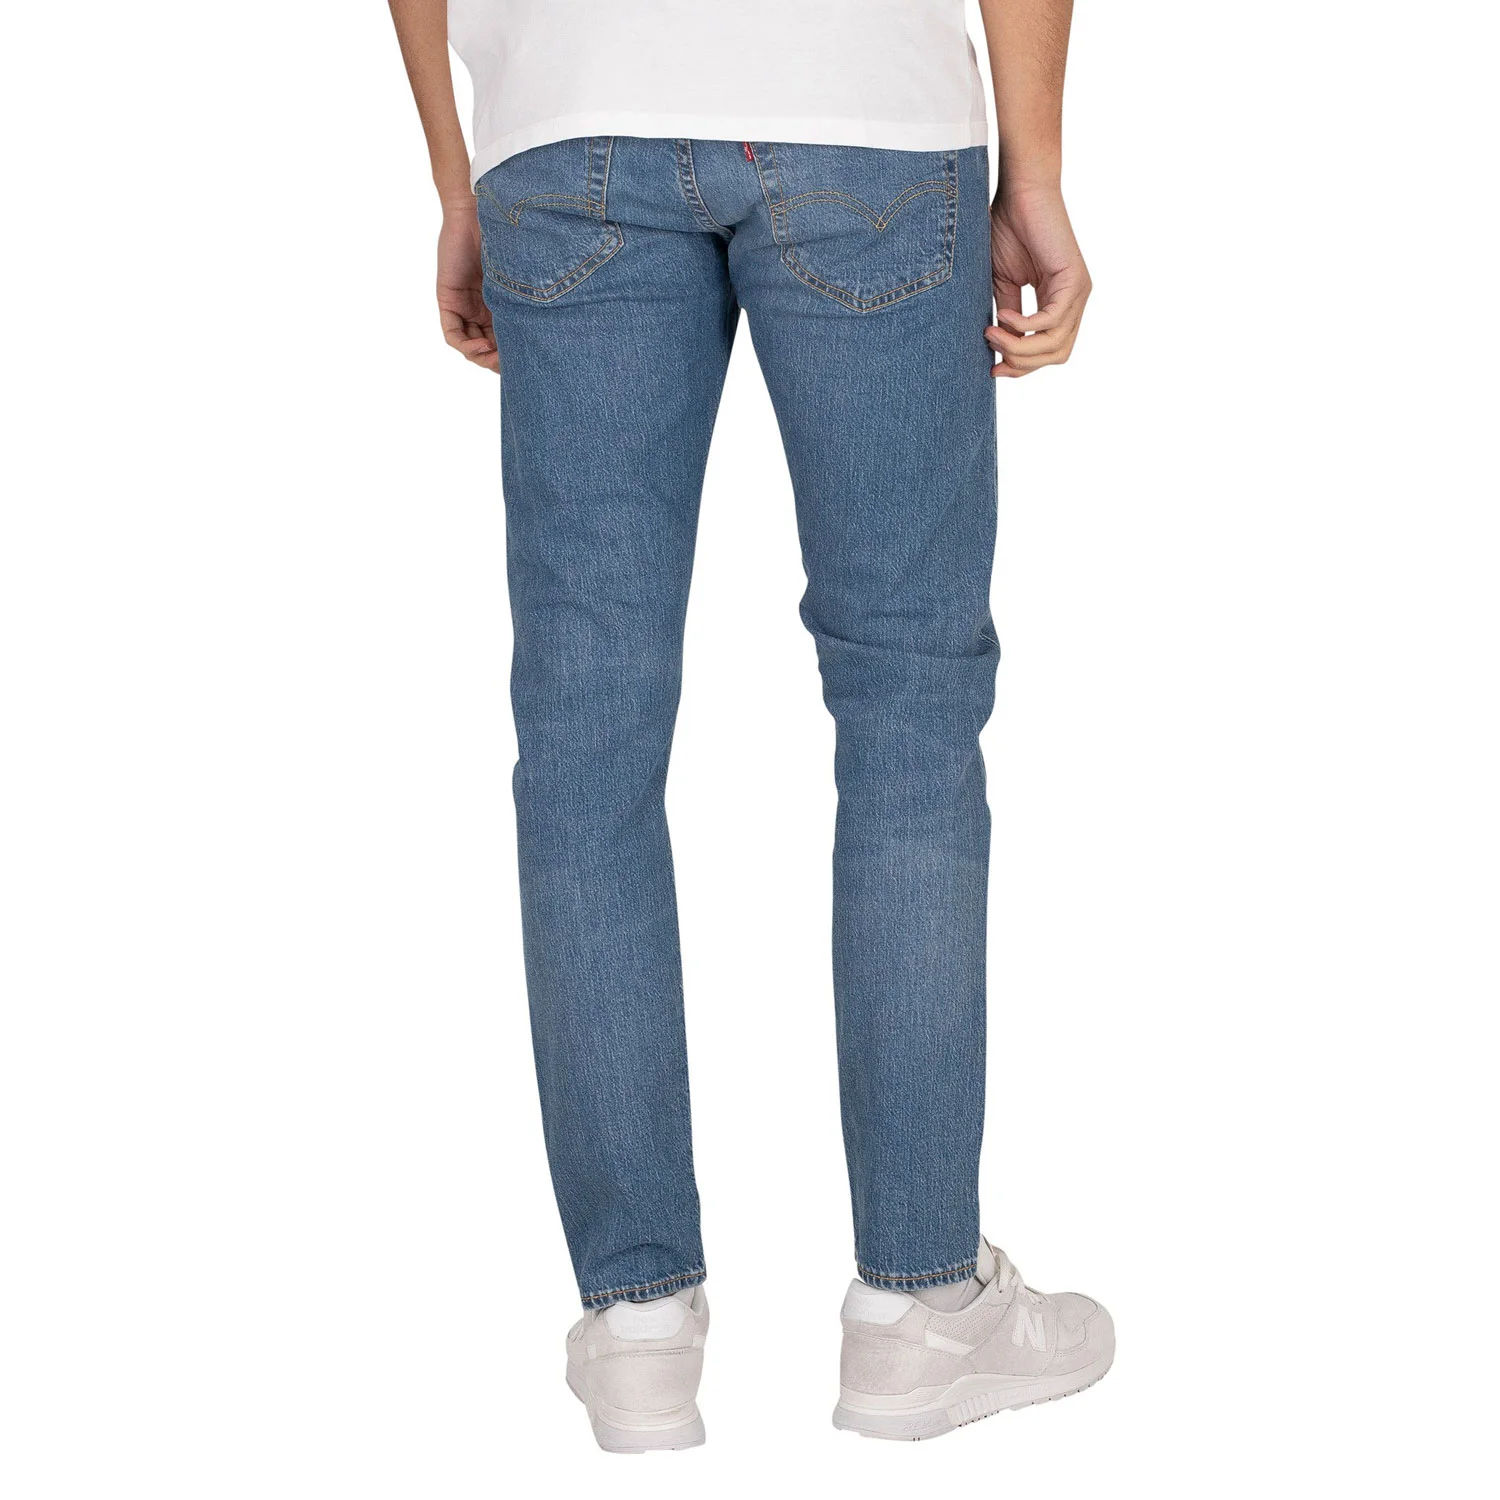 Levis 512 Slim Taper Fit Jean - Tabor Together Now